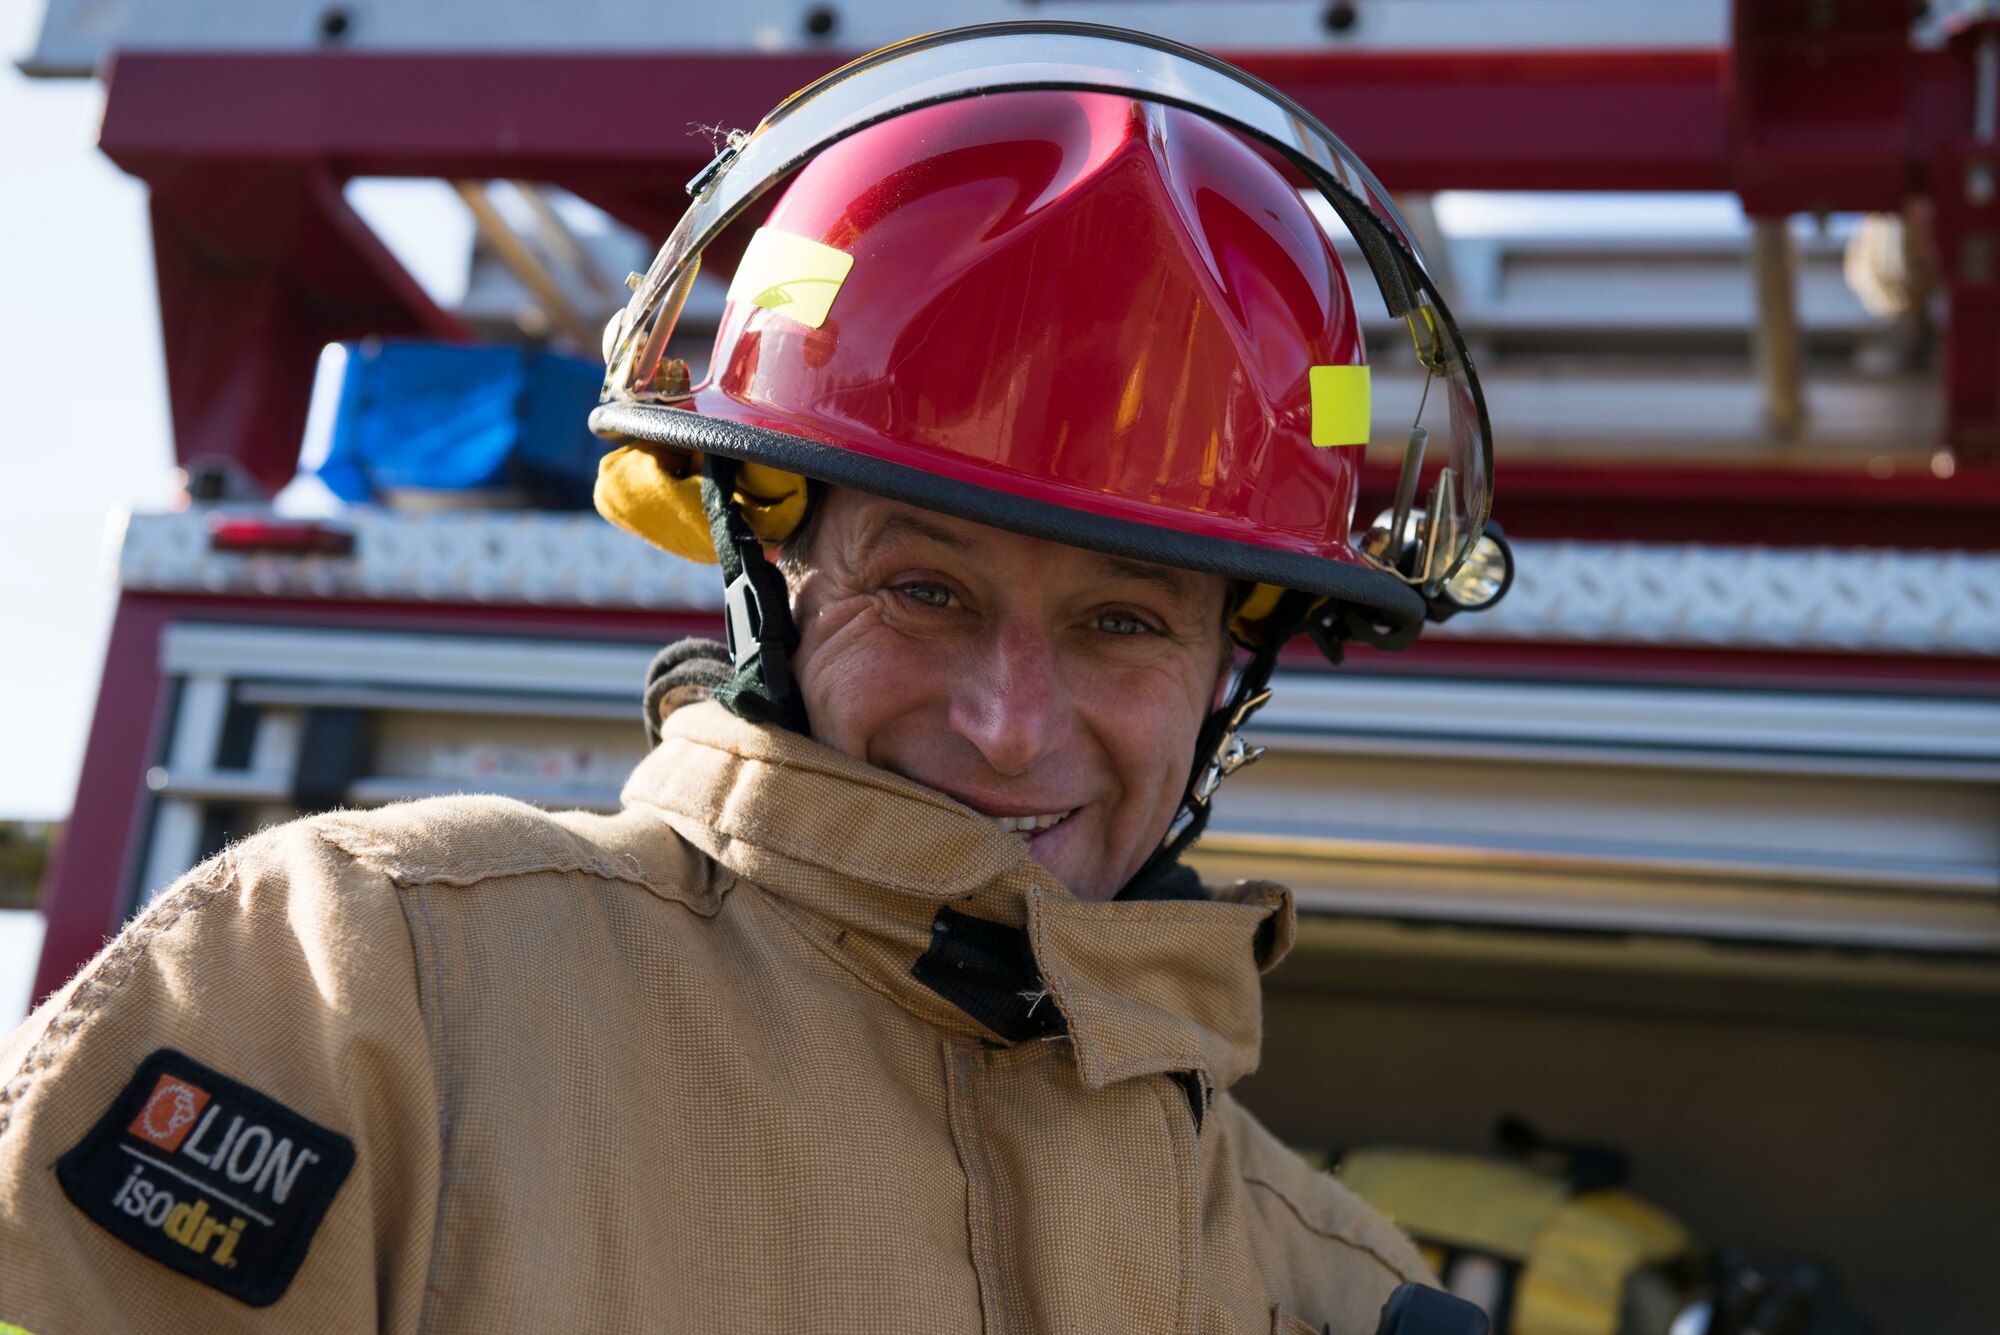 Duncan Fossey, 422nd Civil Engineer Squadron firefighter crew chief, smiles into the camera during the 501st Combat Support Wing Readiness Exercise 20-01 at RAF Croughton, England, Feb. 12, 2020. The exercise tested the wing’s preparedness and response capabilities to an emergency situation. (U.S. Air Force photo by Airman 1st Class Jennifer Zima)